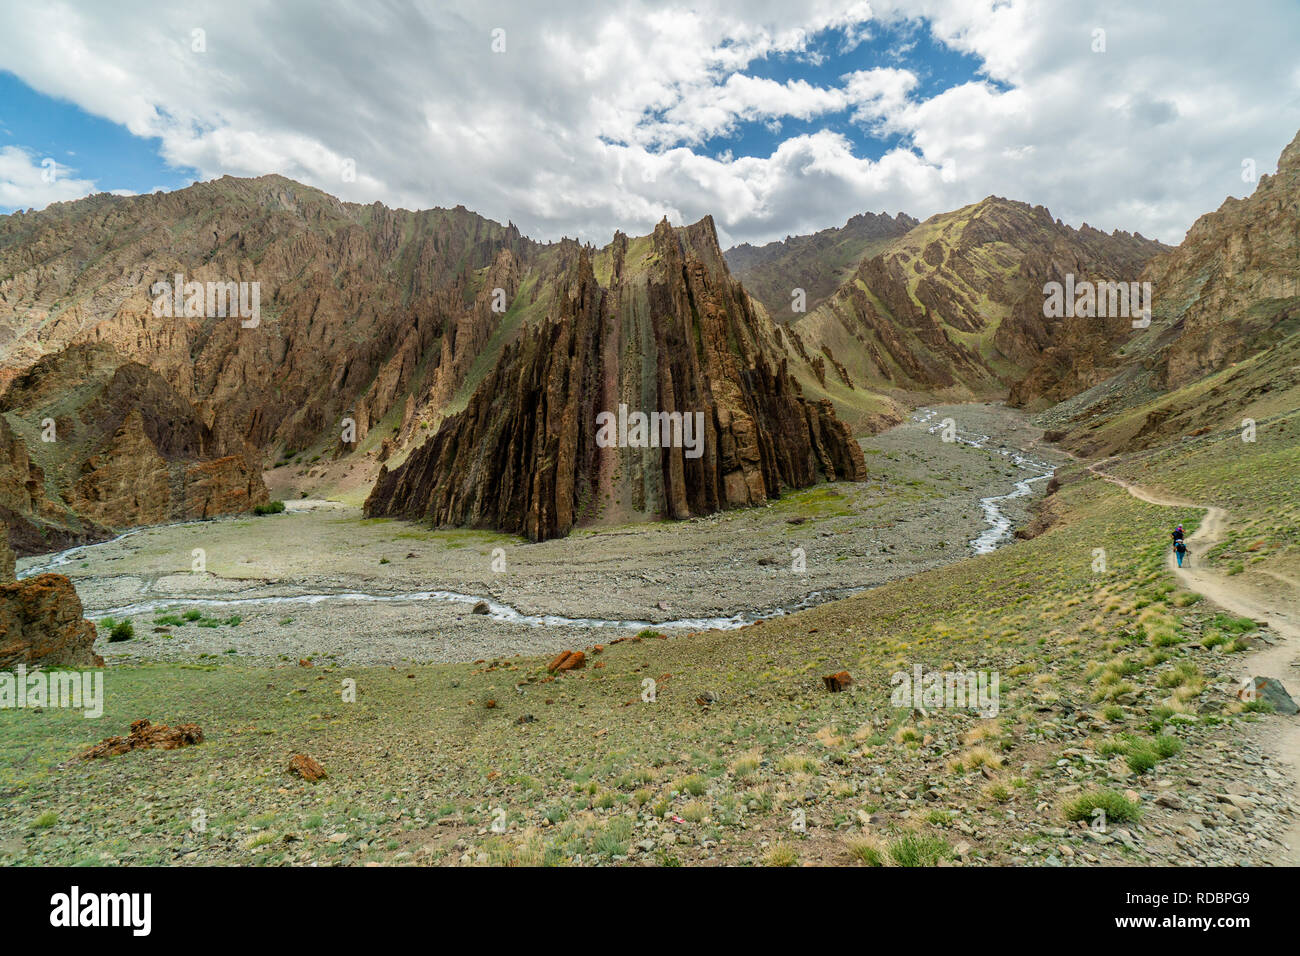 Breathtaking panorama of scenic Markha Valley in old buddhist kingdom of Ladakh in India. Popular tourist destination and hiking route. Stock Photo